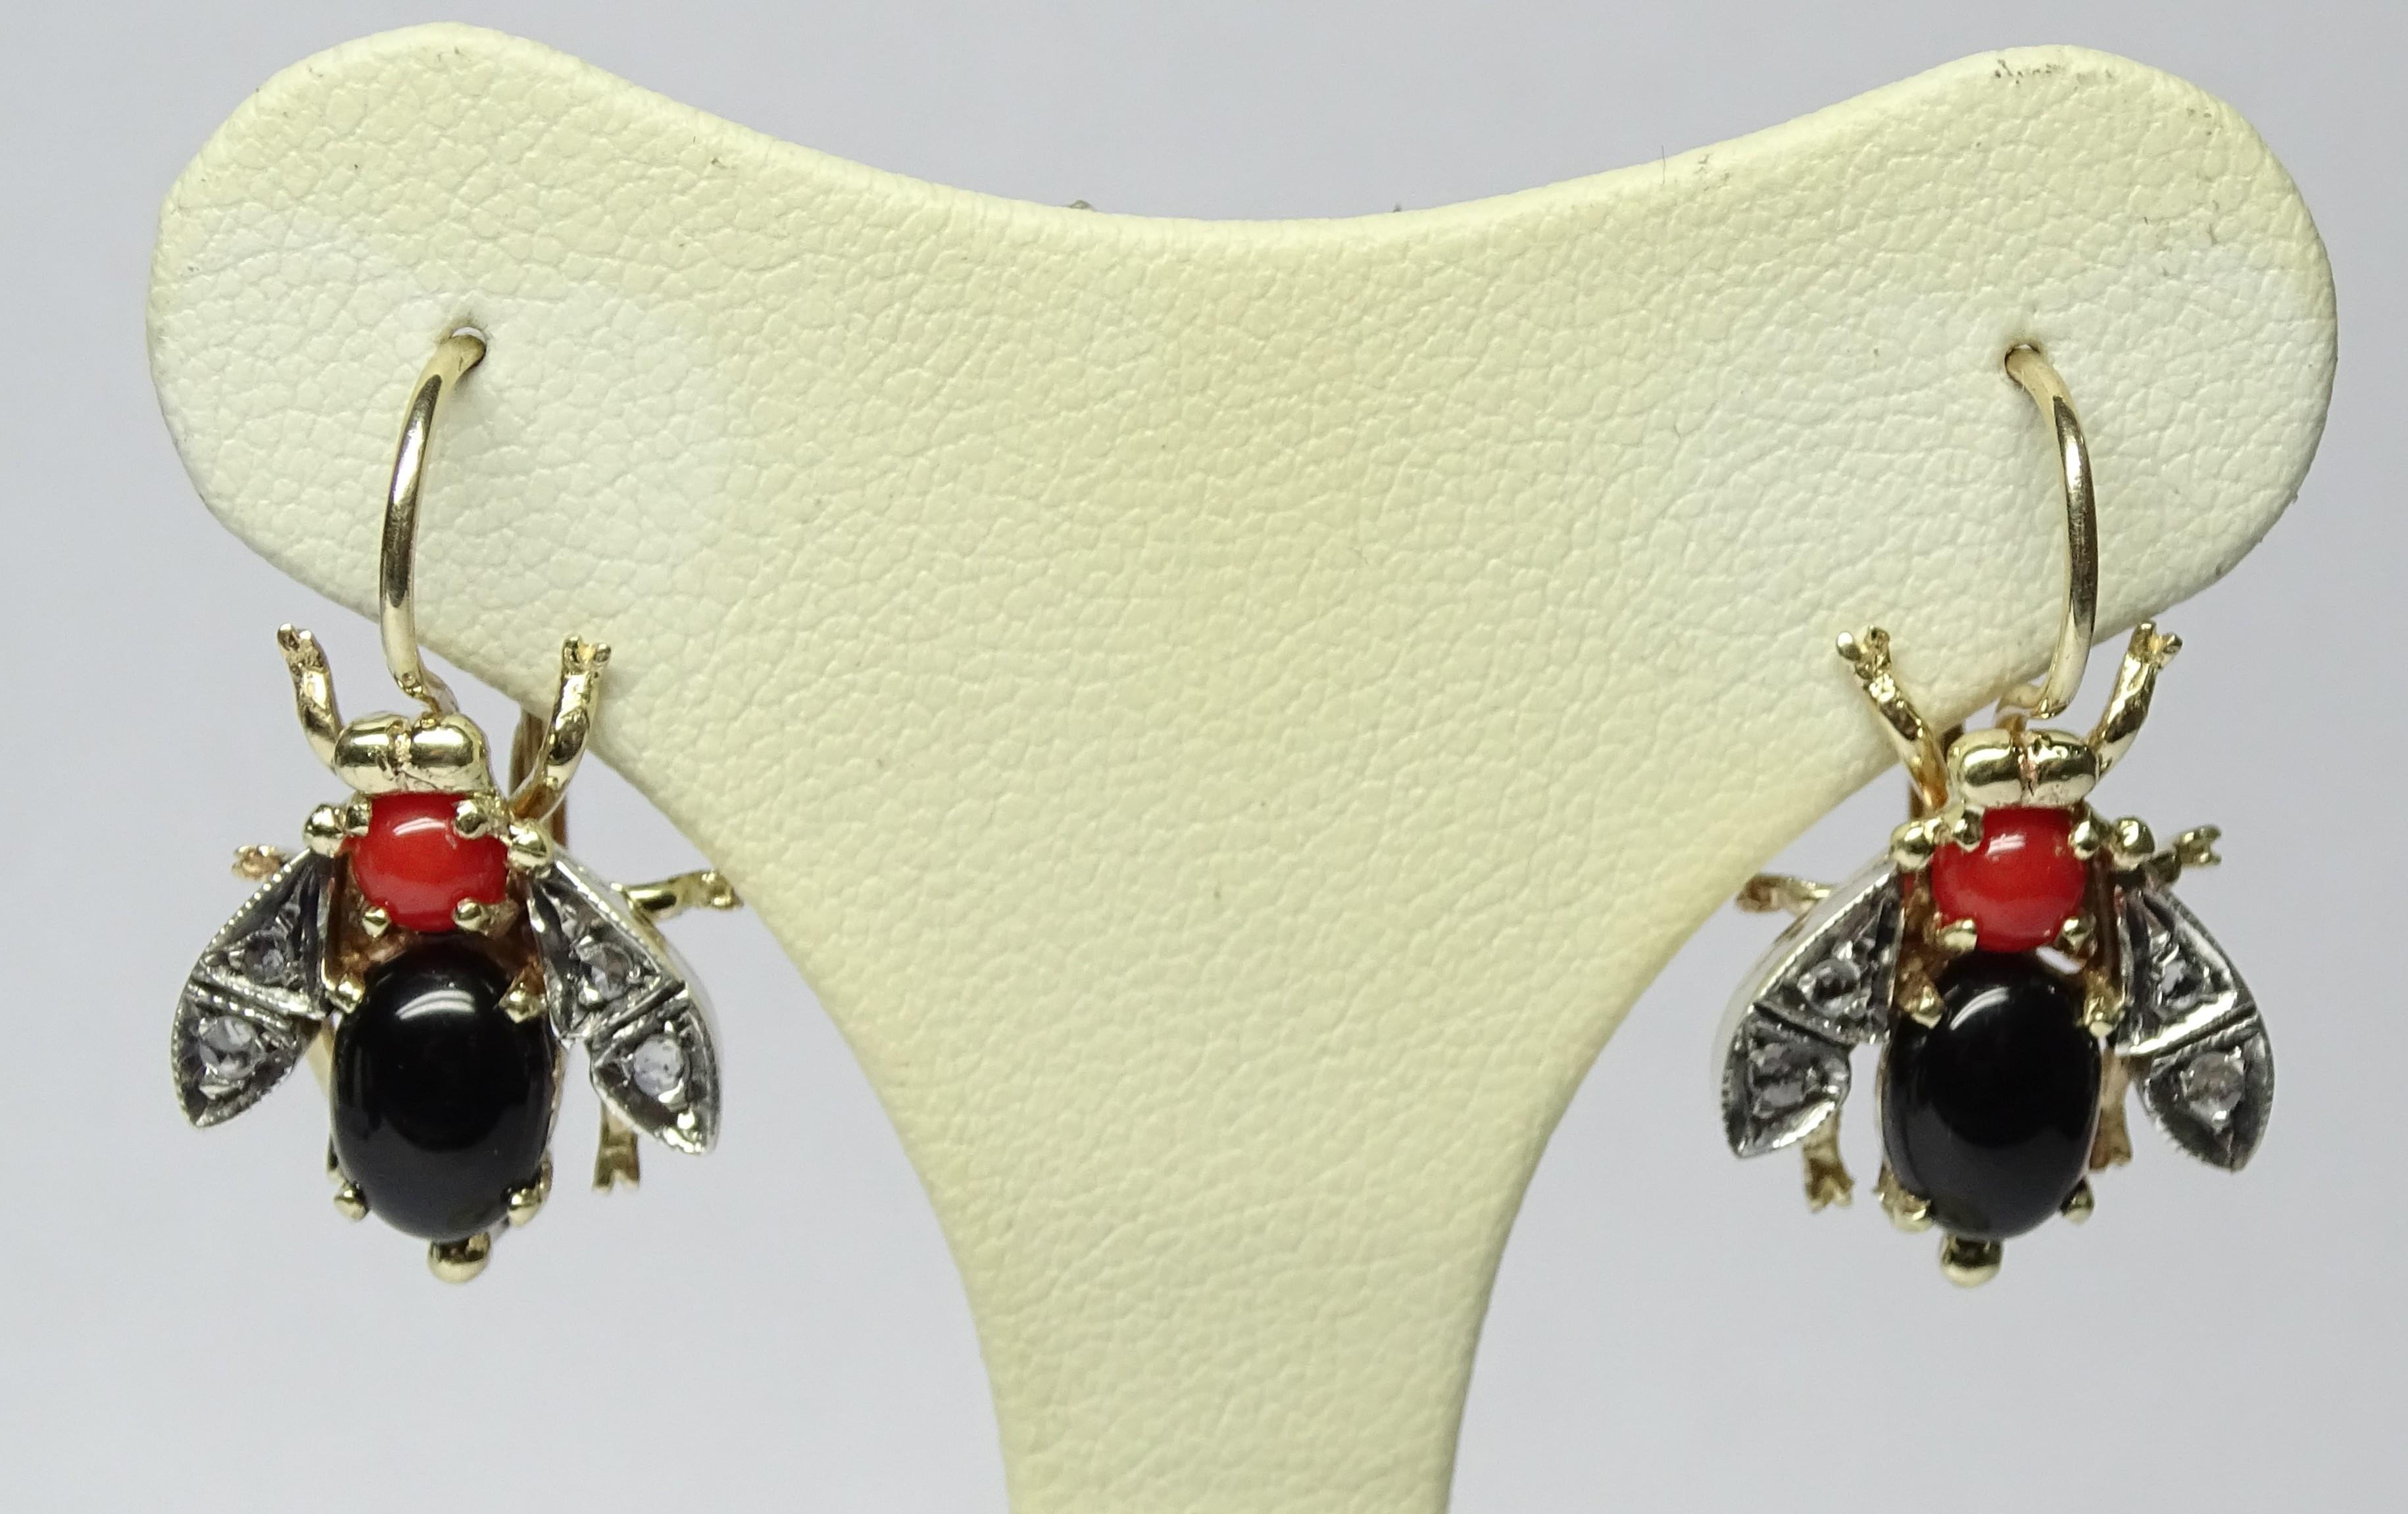 These Earrings are made of 9K Yellow Gold and Sterling Silver.
These Earrings have 0.16 Carats of Rose Cut Diamonds.
These Earrings have Onyx and Coral.
These Earrings are inspired by Art Nouveau
All our Earrings have pins for pierced ears but we